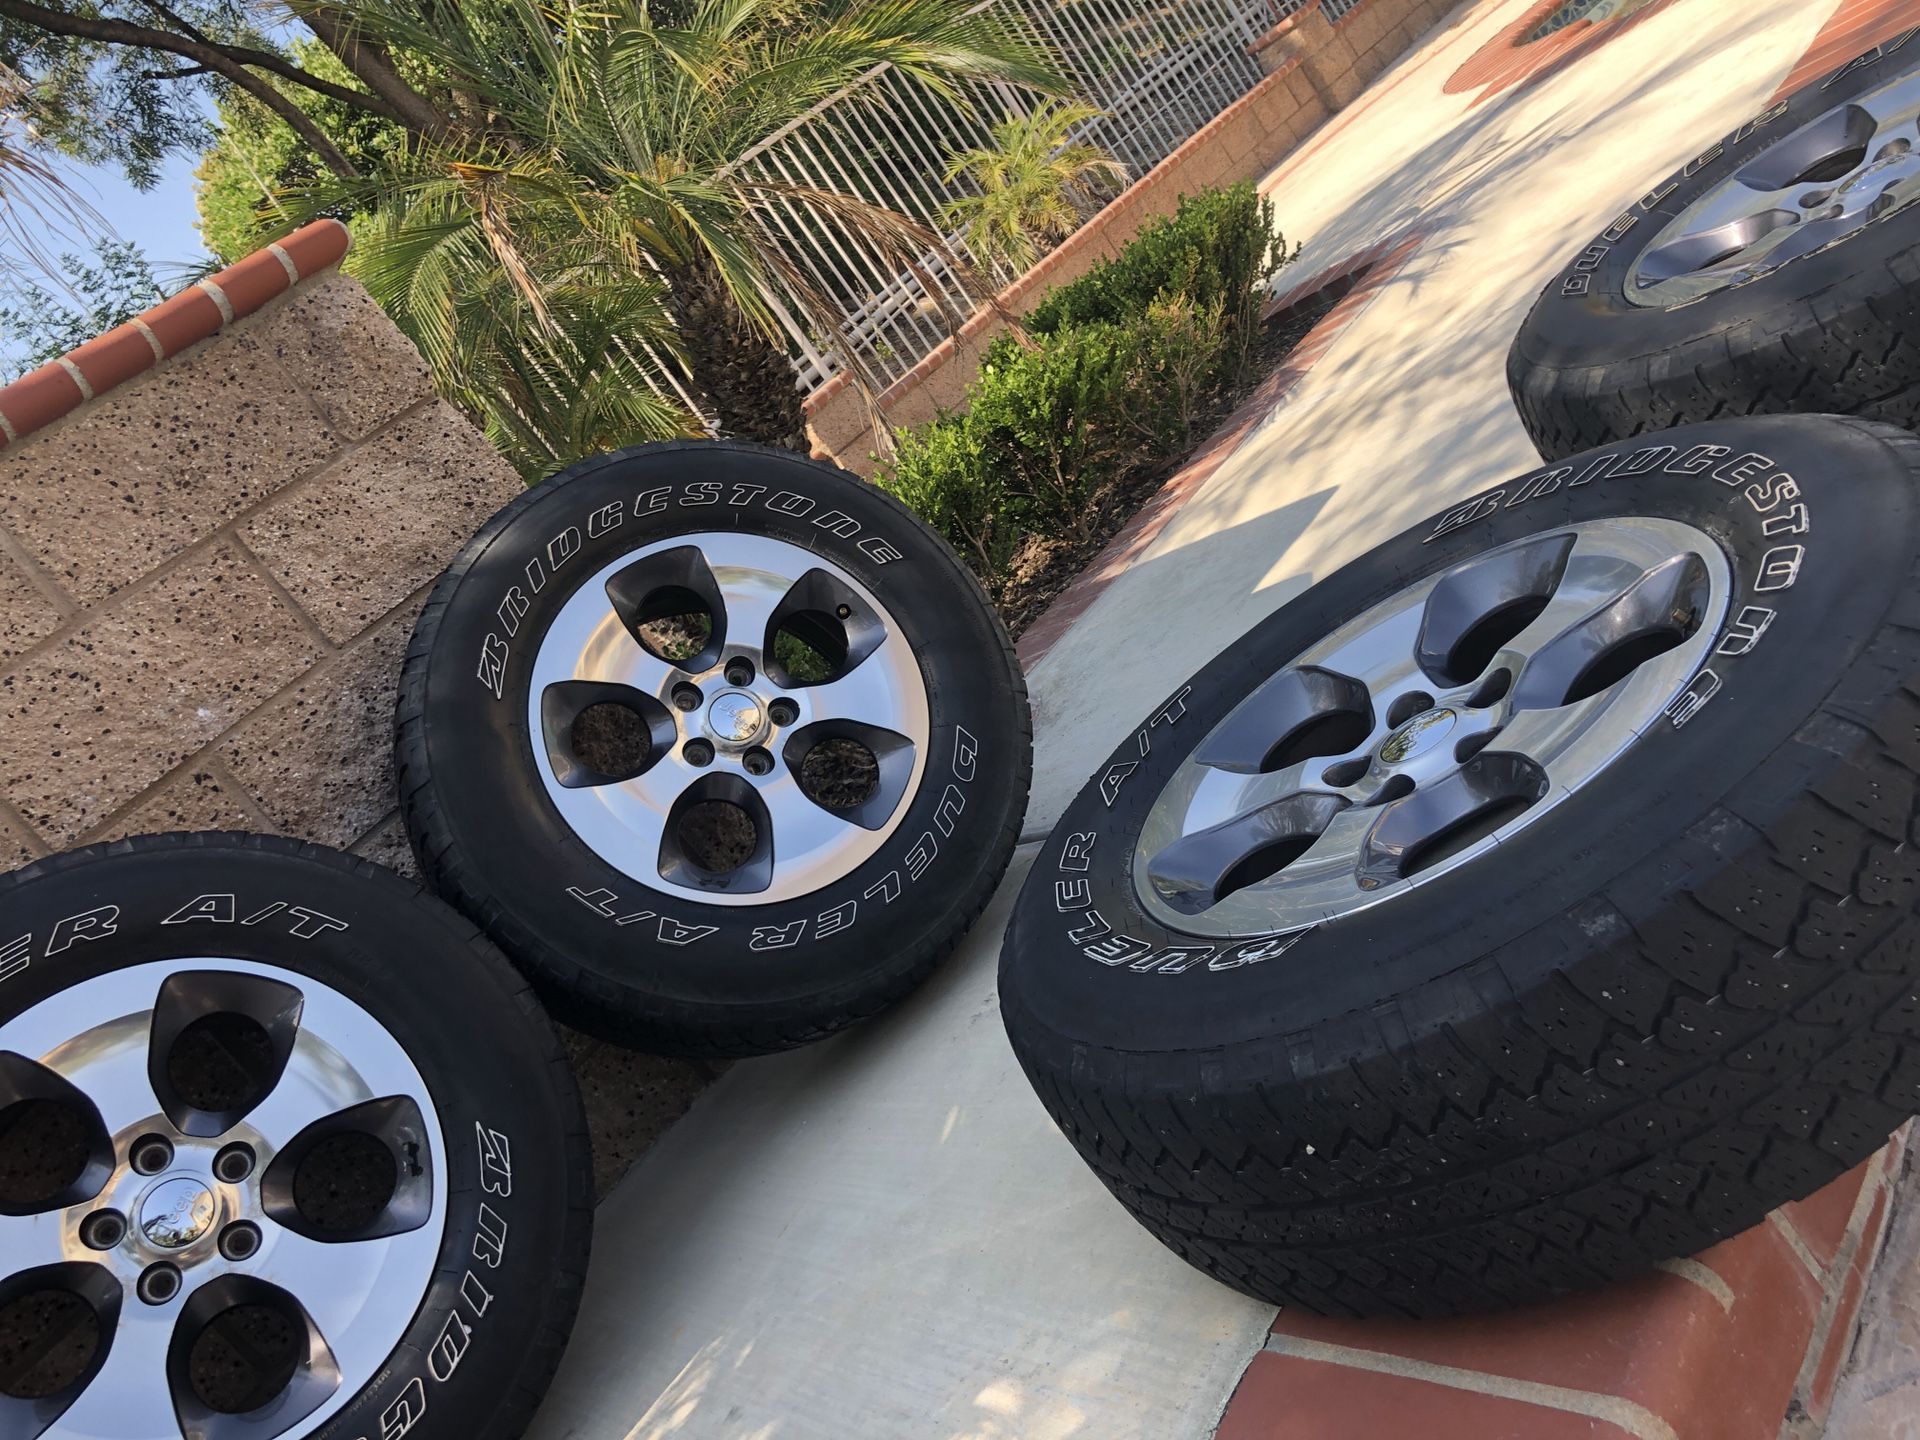 tires + rims all 4 only! And lug nuts. 255/70/18